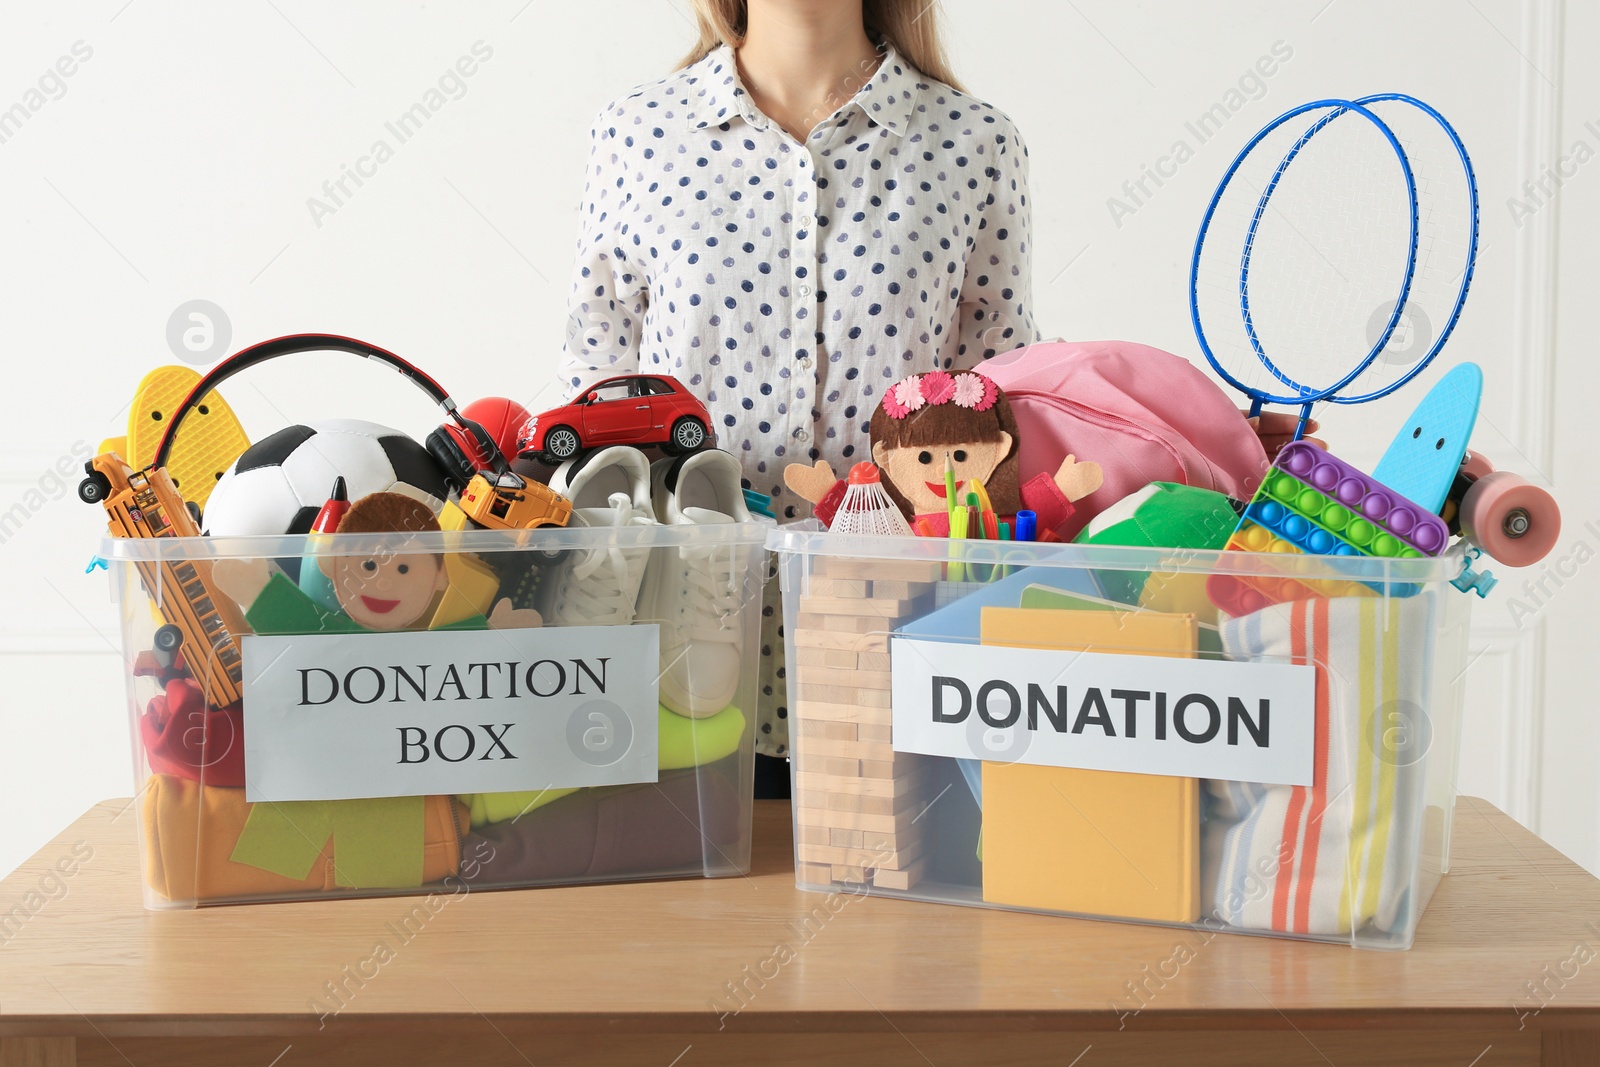 Photo of Woman near donation boxes with child toys against white background, closeup